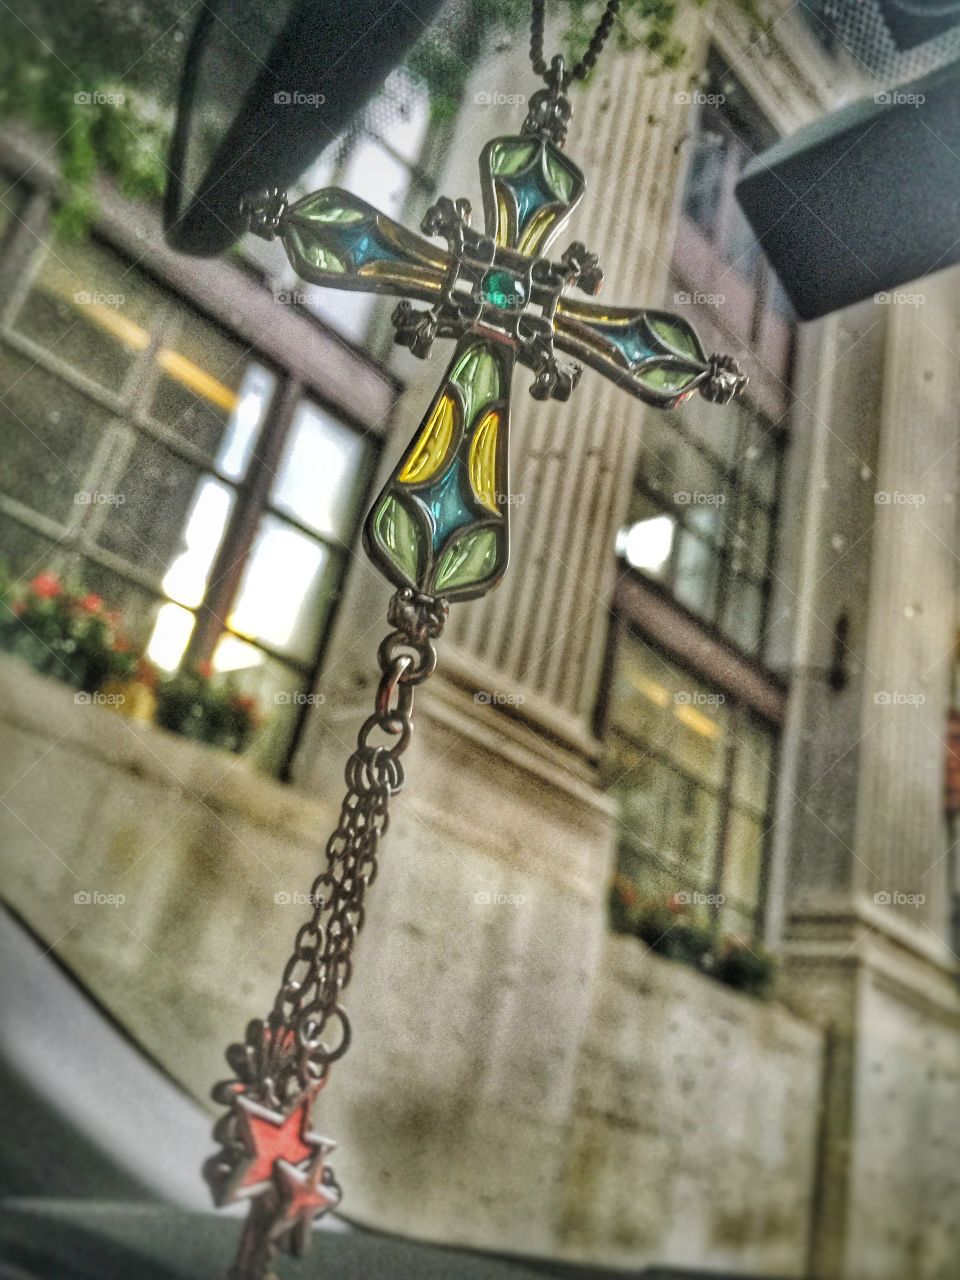 Cross. A cross hanging on a rear view mirror 